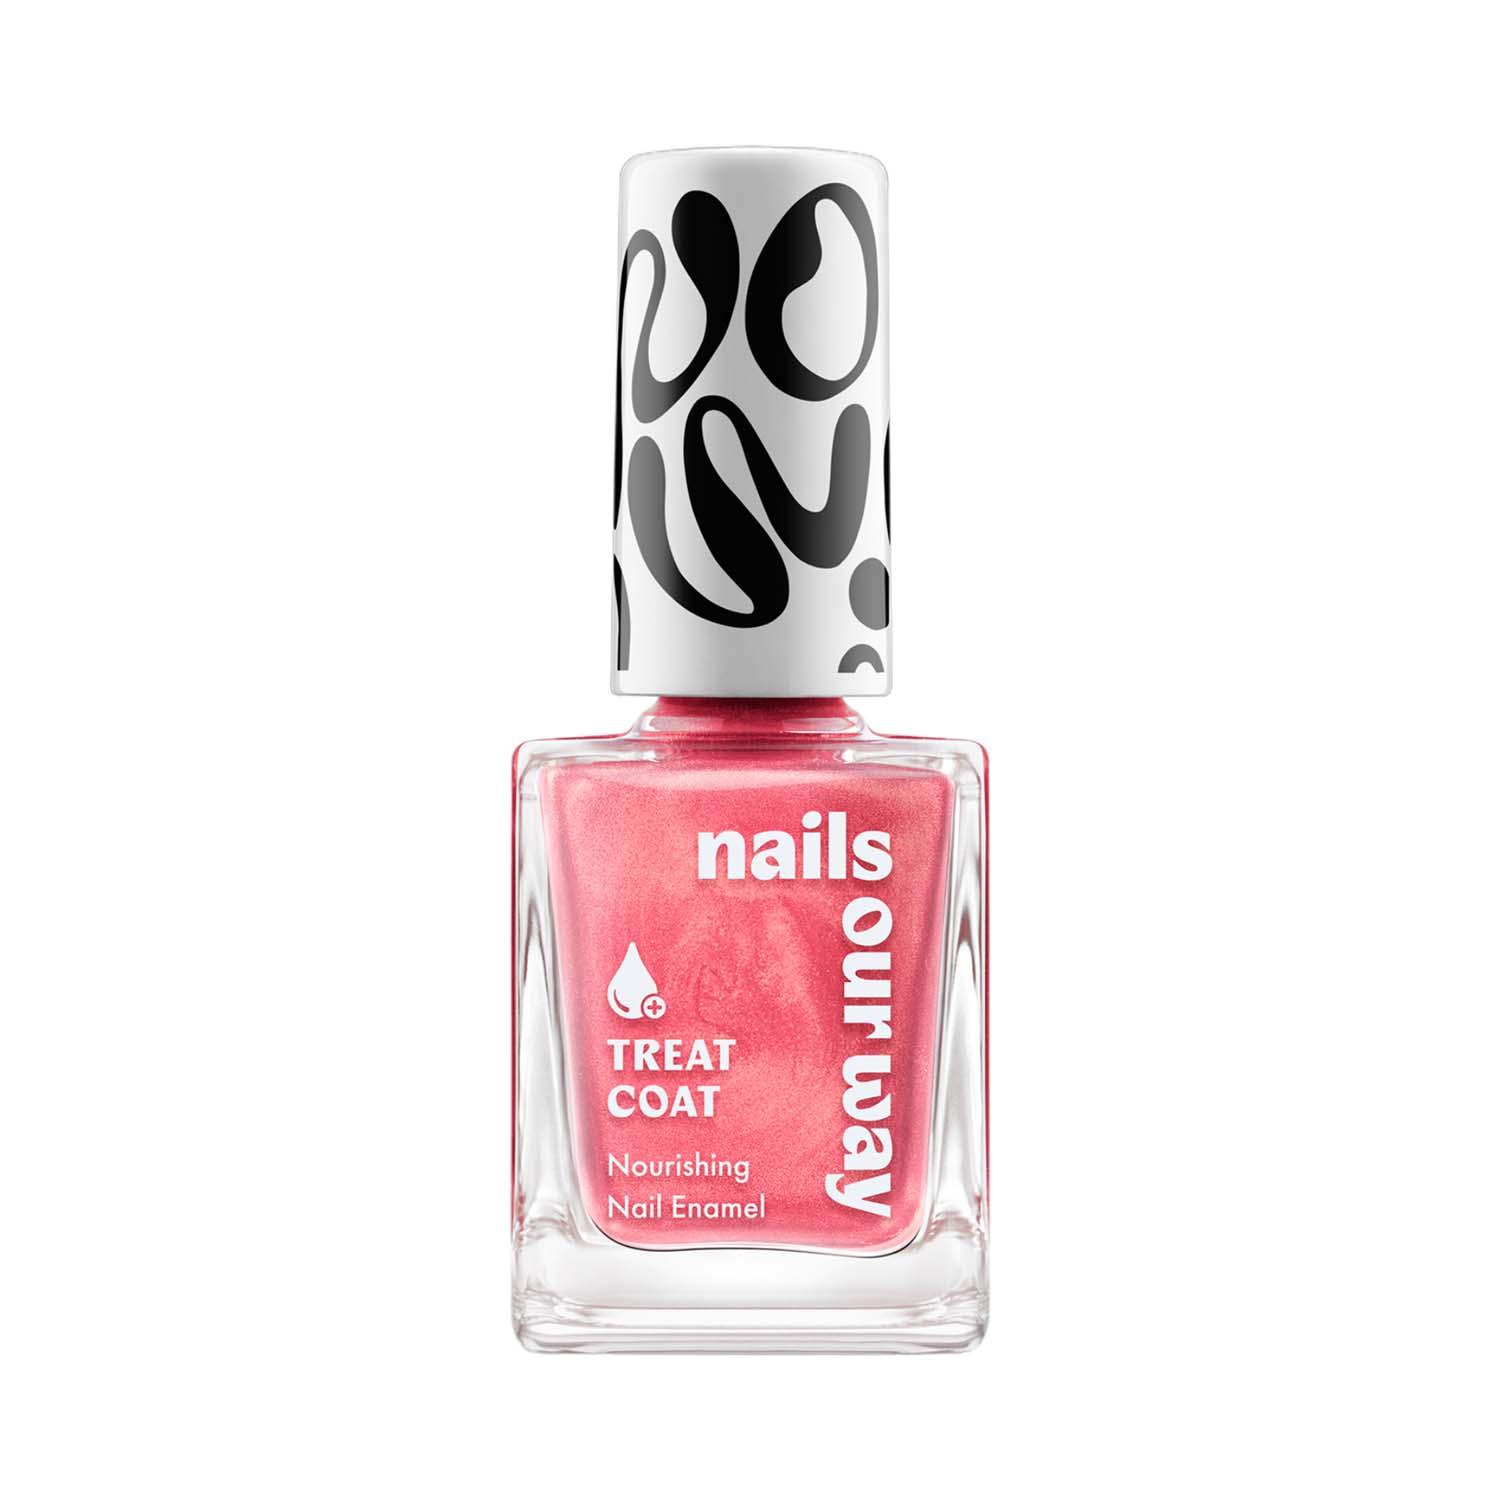 Nails Our Way | Nails Our Way Treat Coat Nail Enamel - Inspirational Innovator (10 ml)